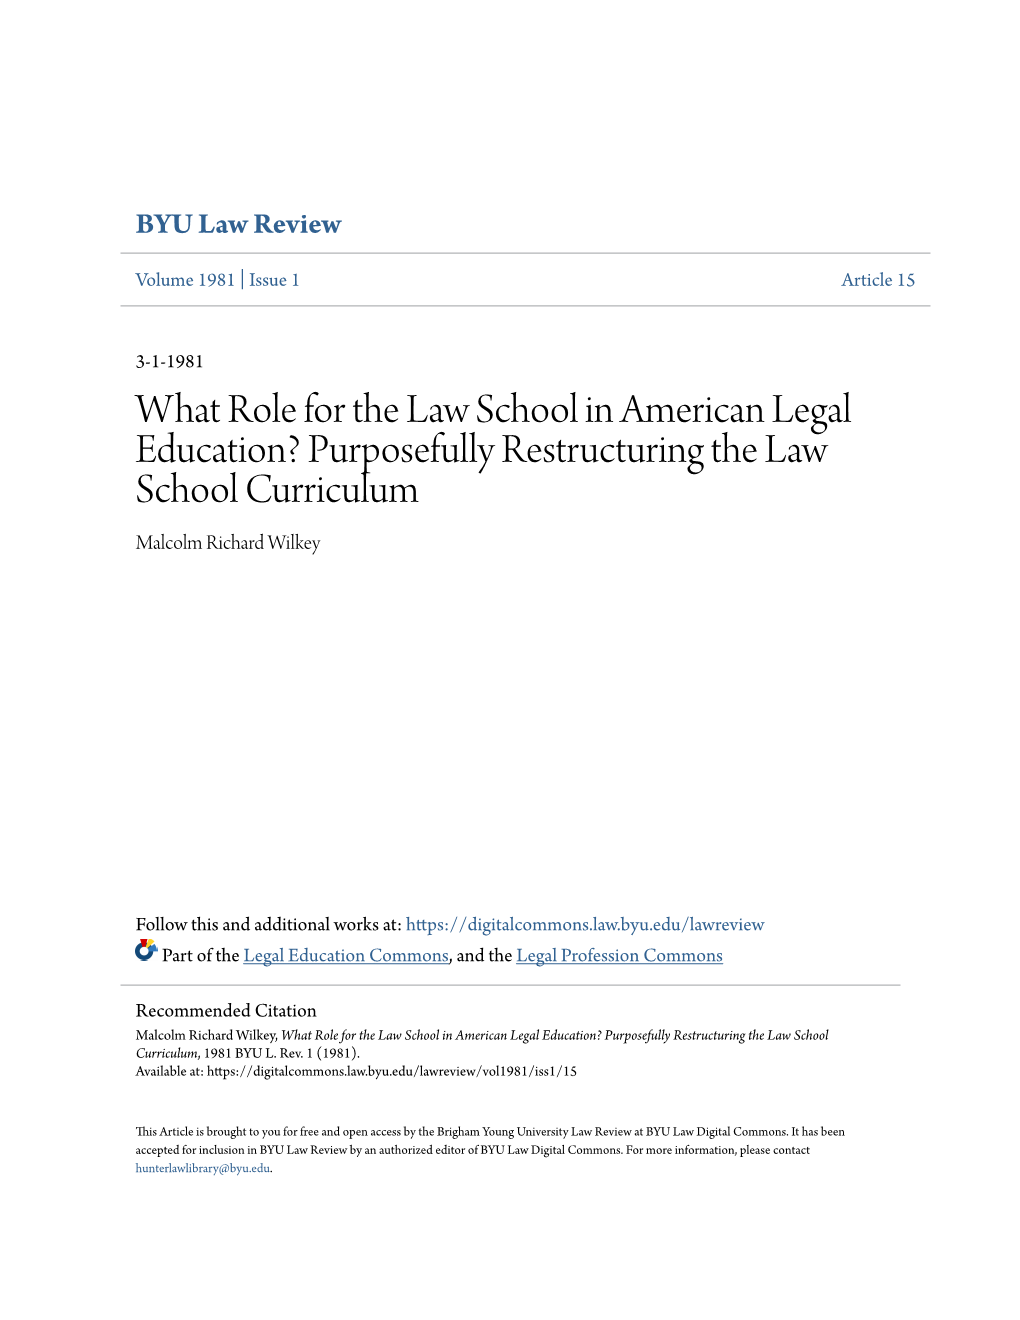 Purposefully Restructuring the Law School Curriculum Malcolm Richard Wilkey